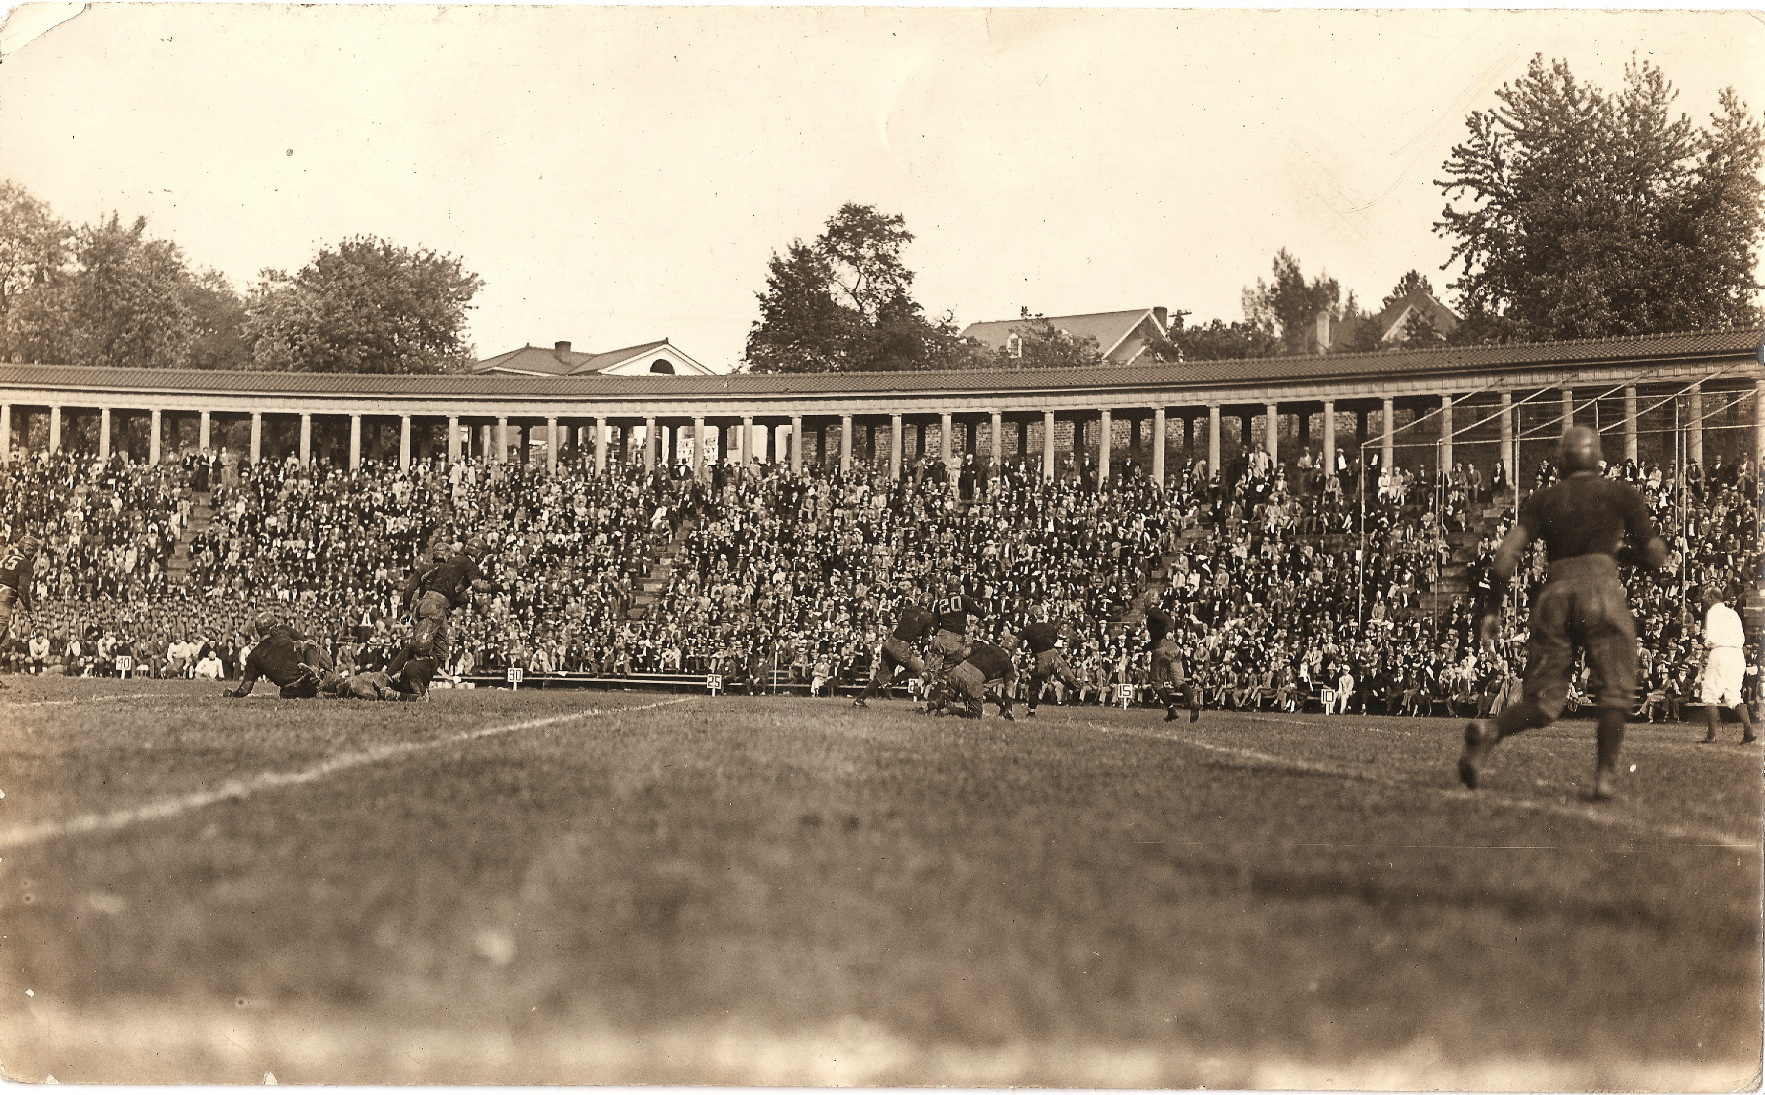 1913 football game in front of the Lambeth Colonnades